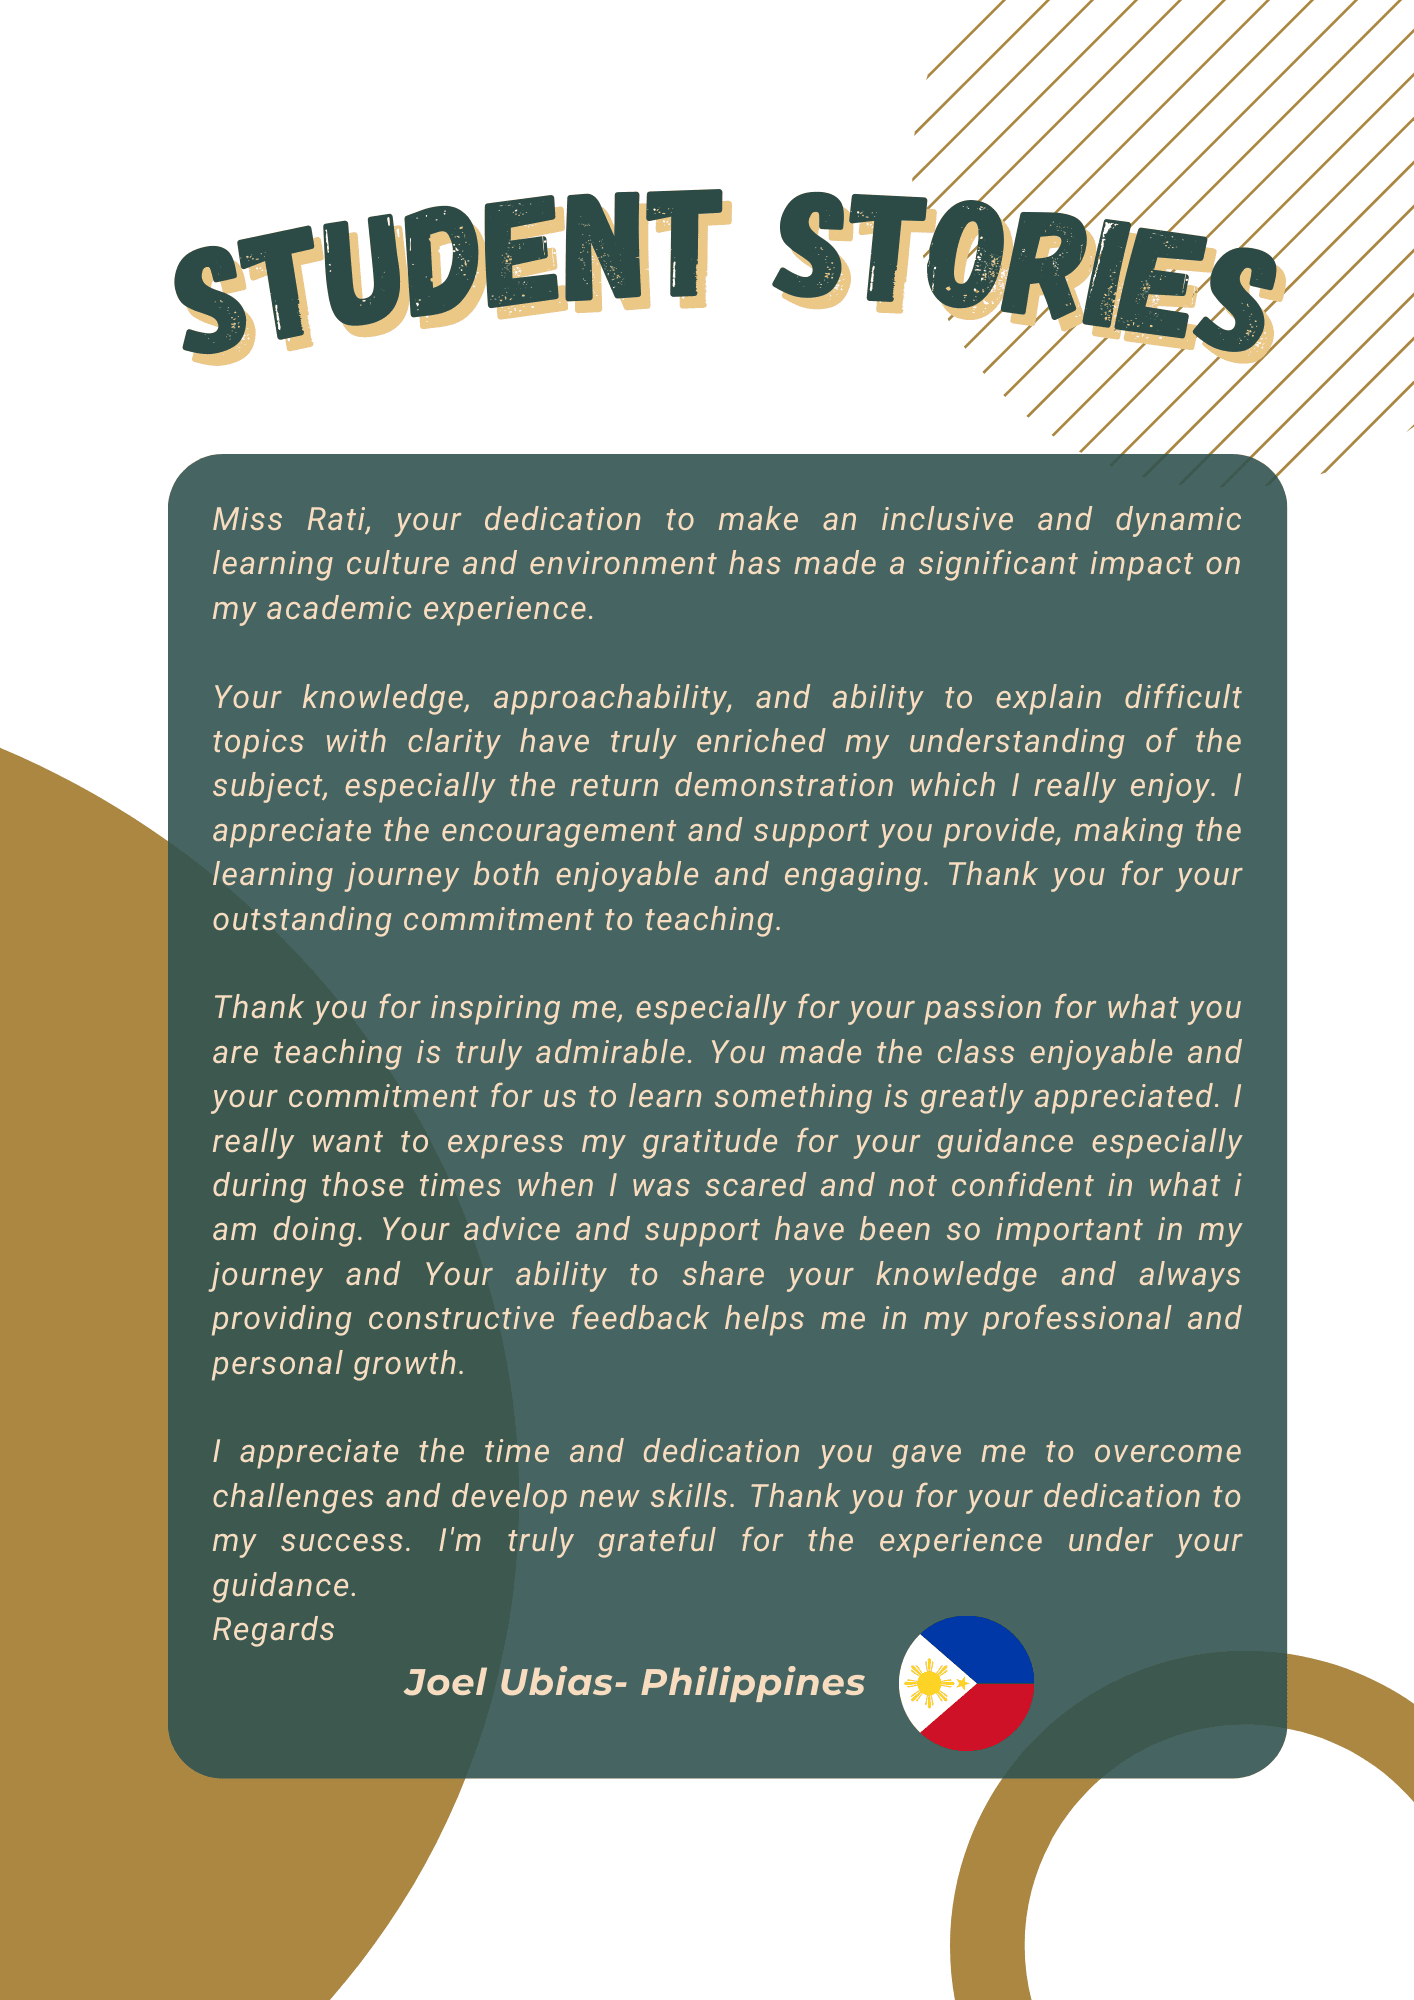 Student Stories Page 3 of 5